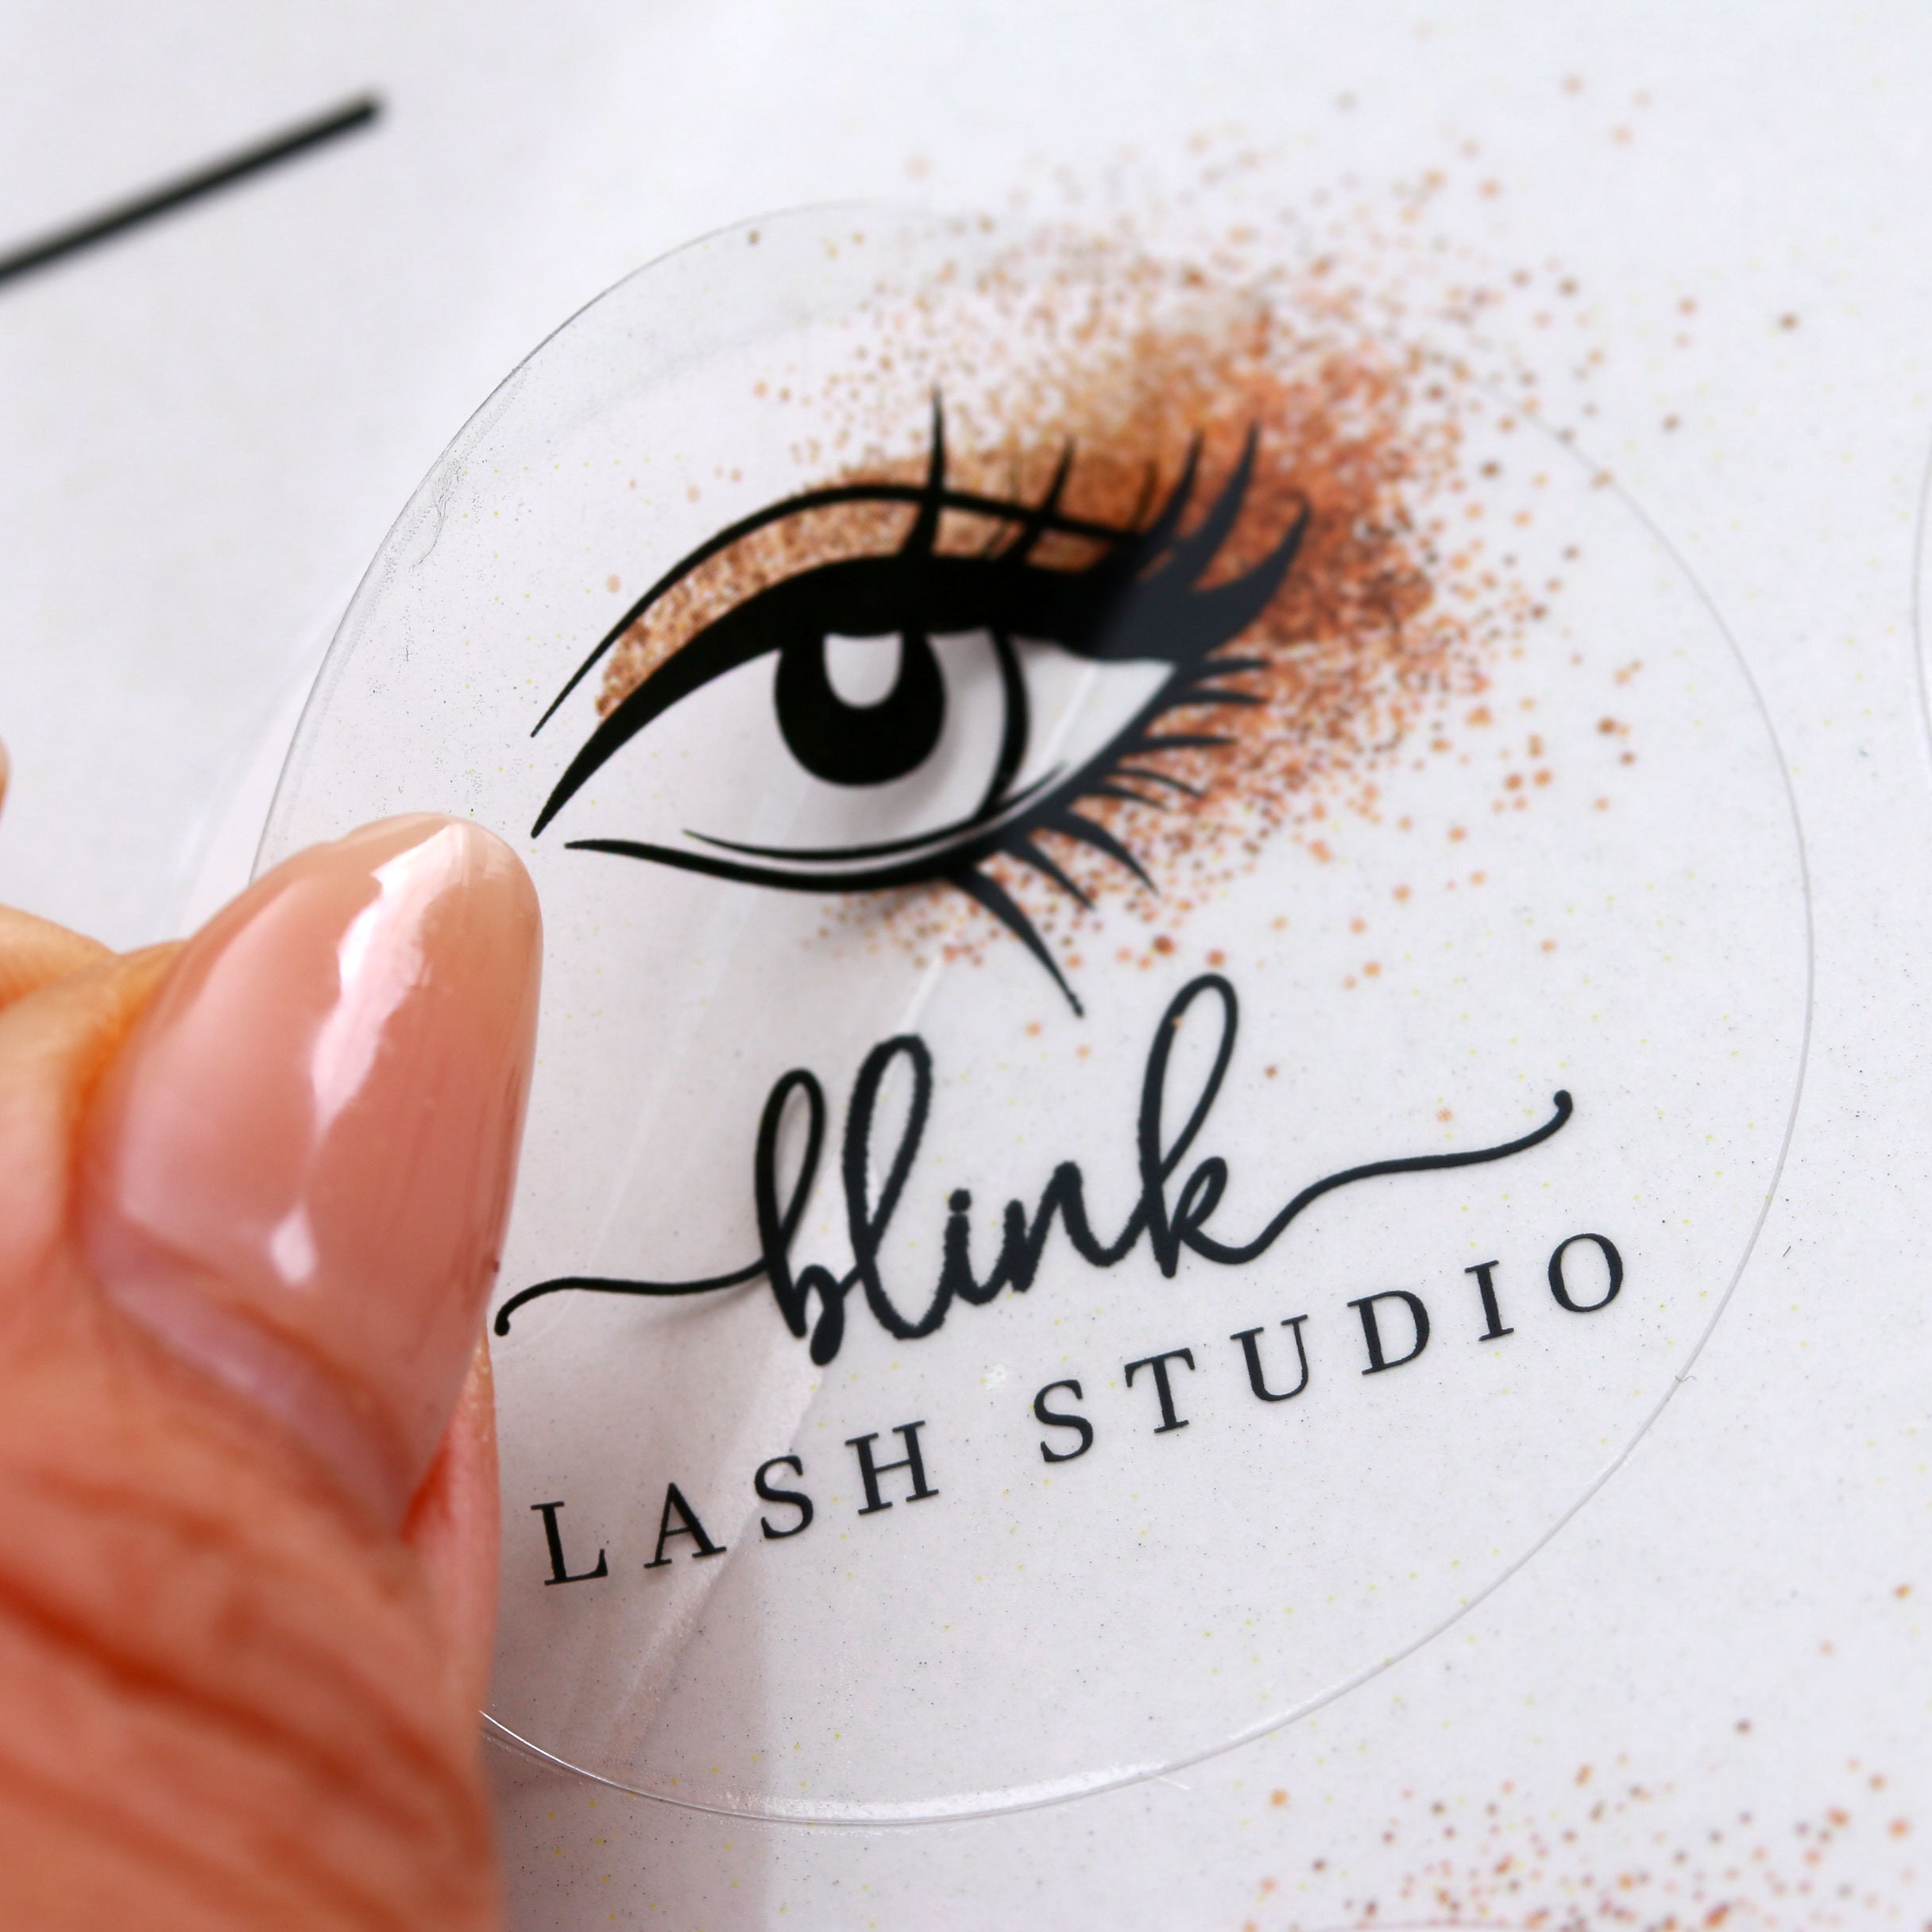 Custom Stickers Private Labels - OWN Stickers for Lash Business LOGO